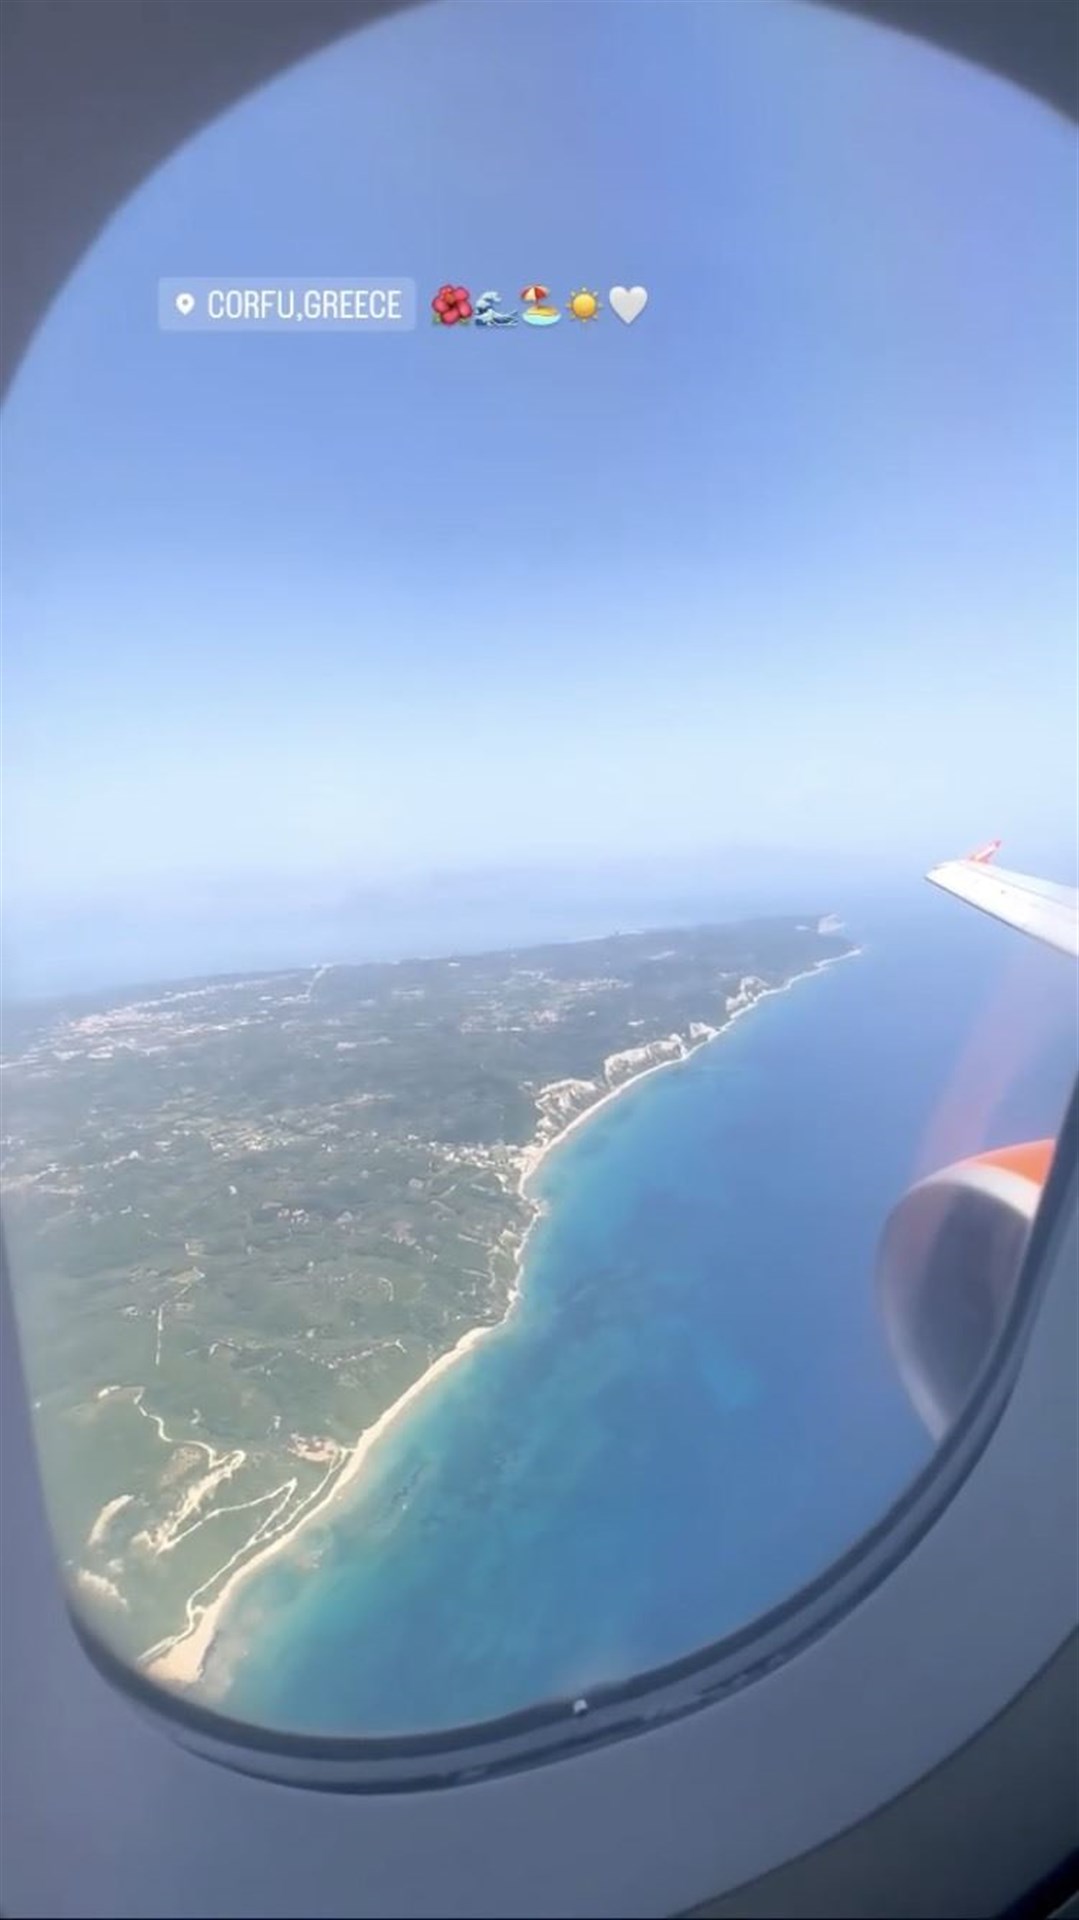 Adele Buyze's Instagram picture flying into Corfu